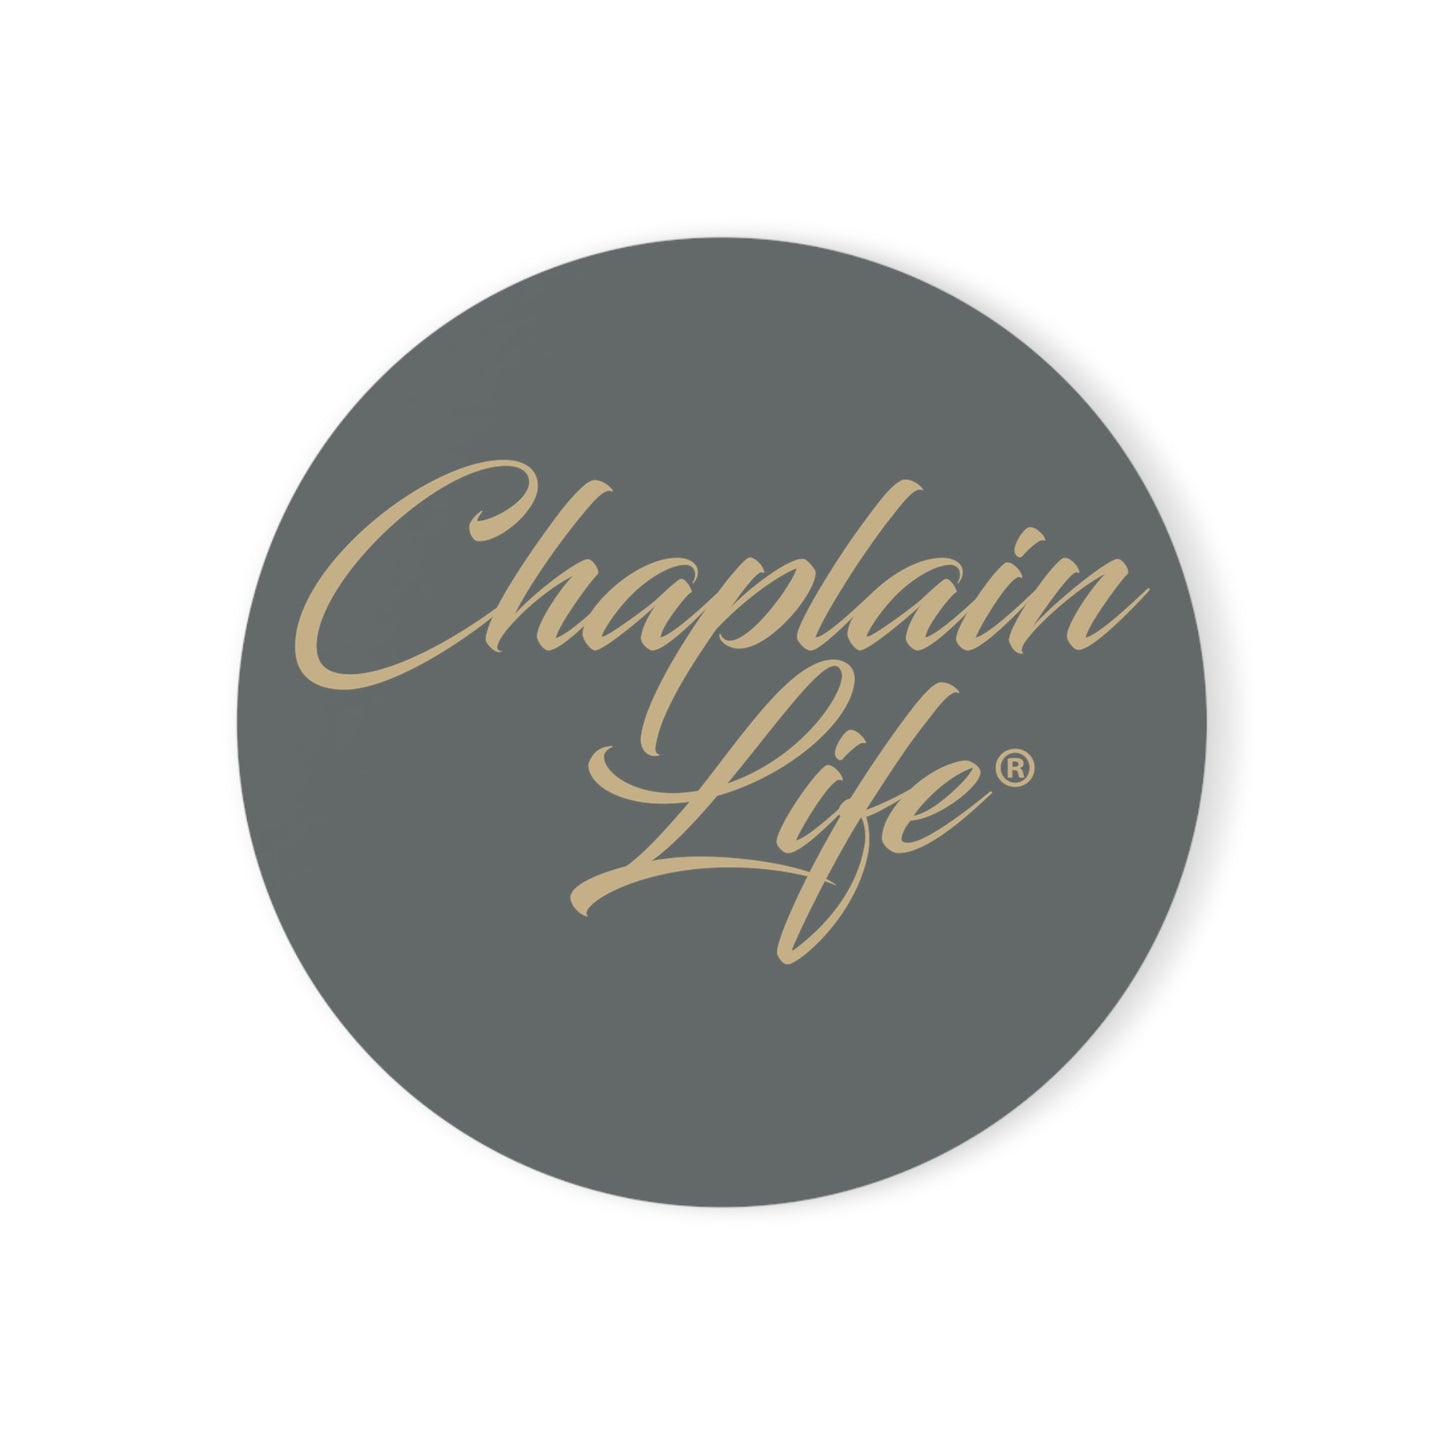 Cork Back Chaplain Life® Coaster, Gifts for Chaplains